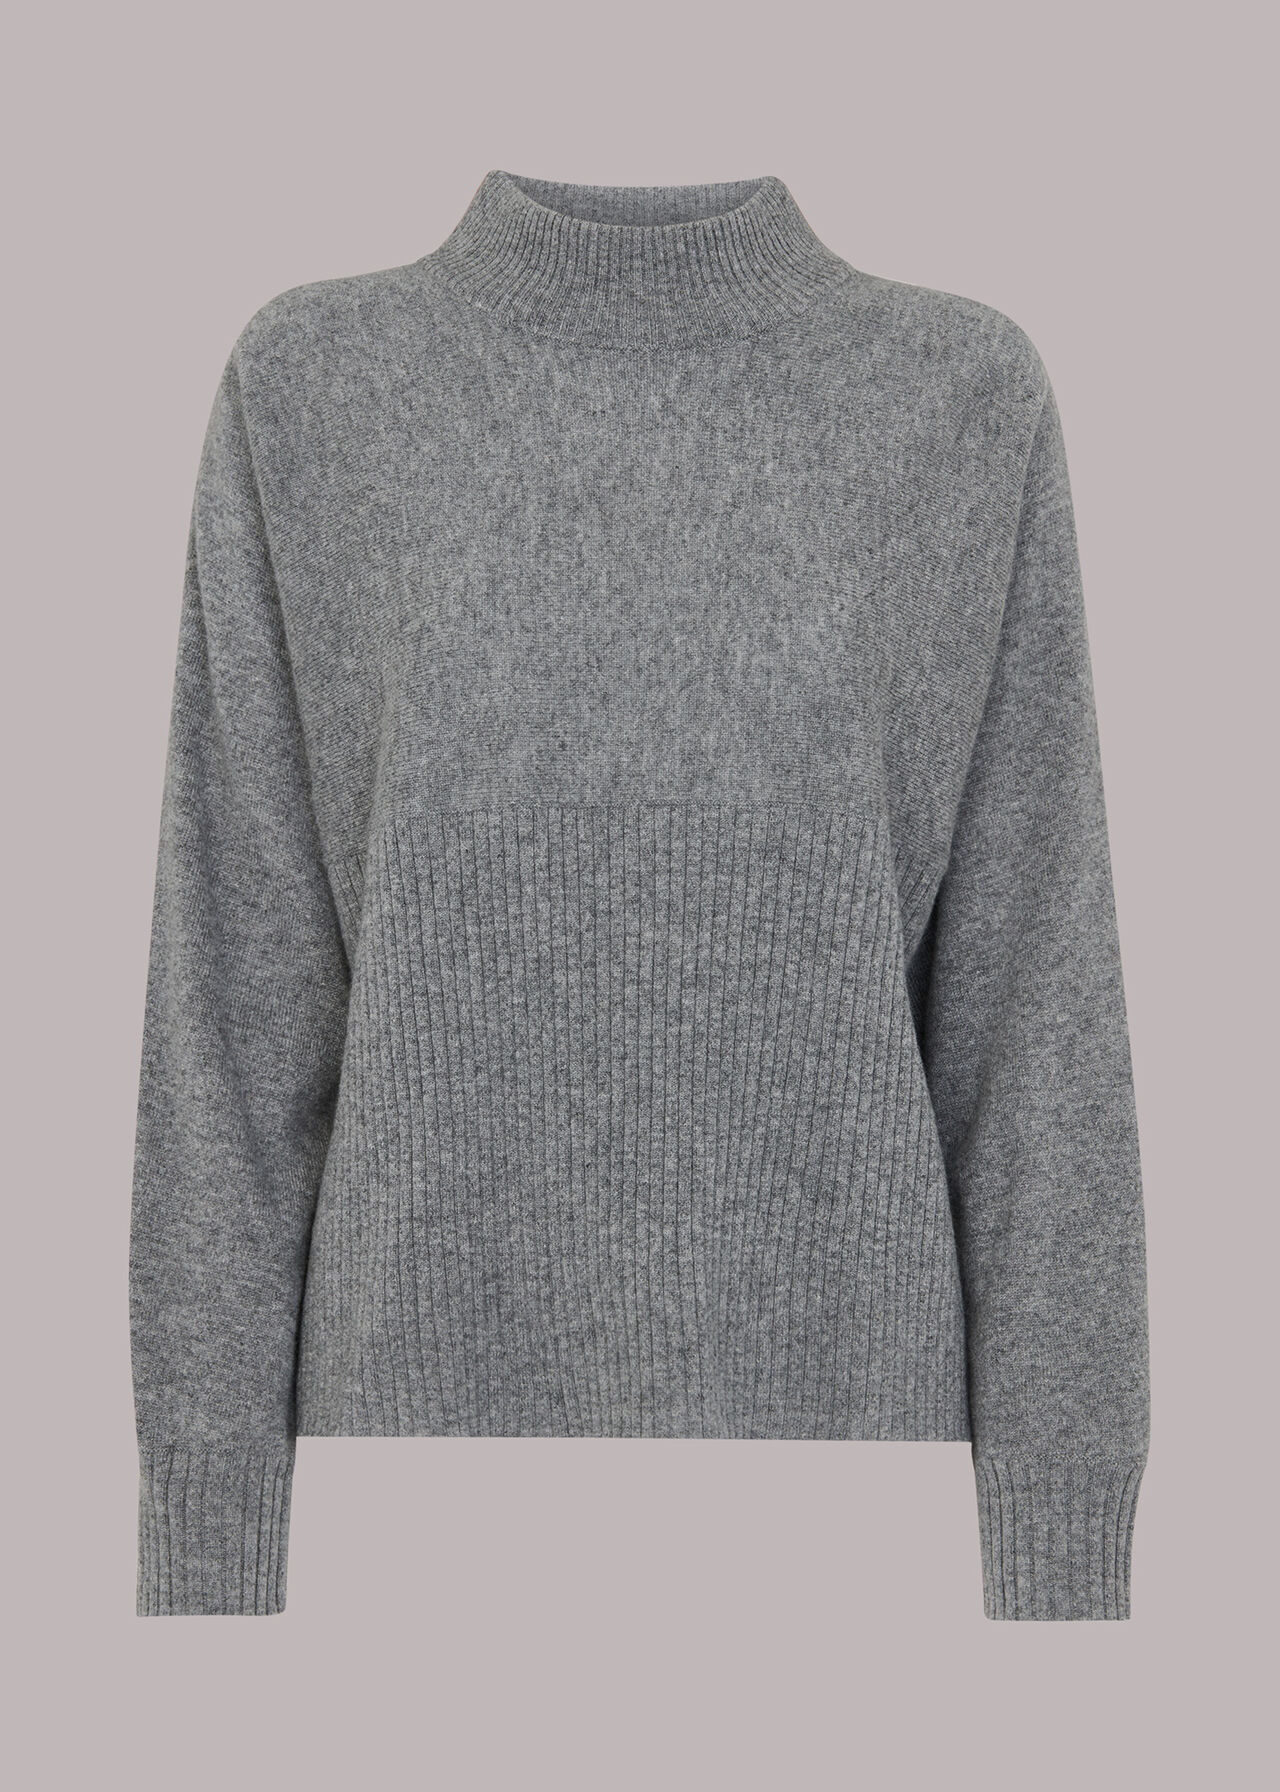 Ribbed Panel Cashmere Sweater